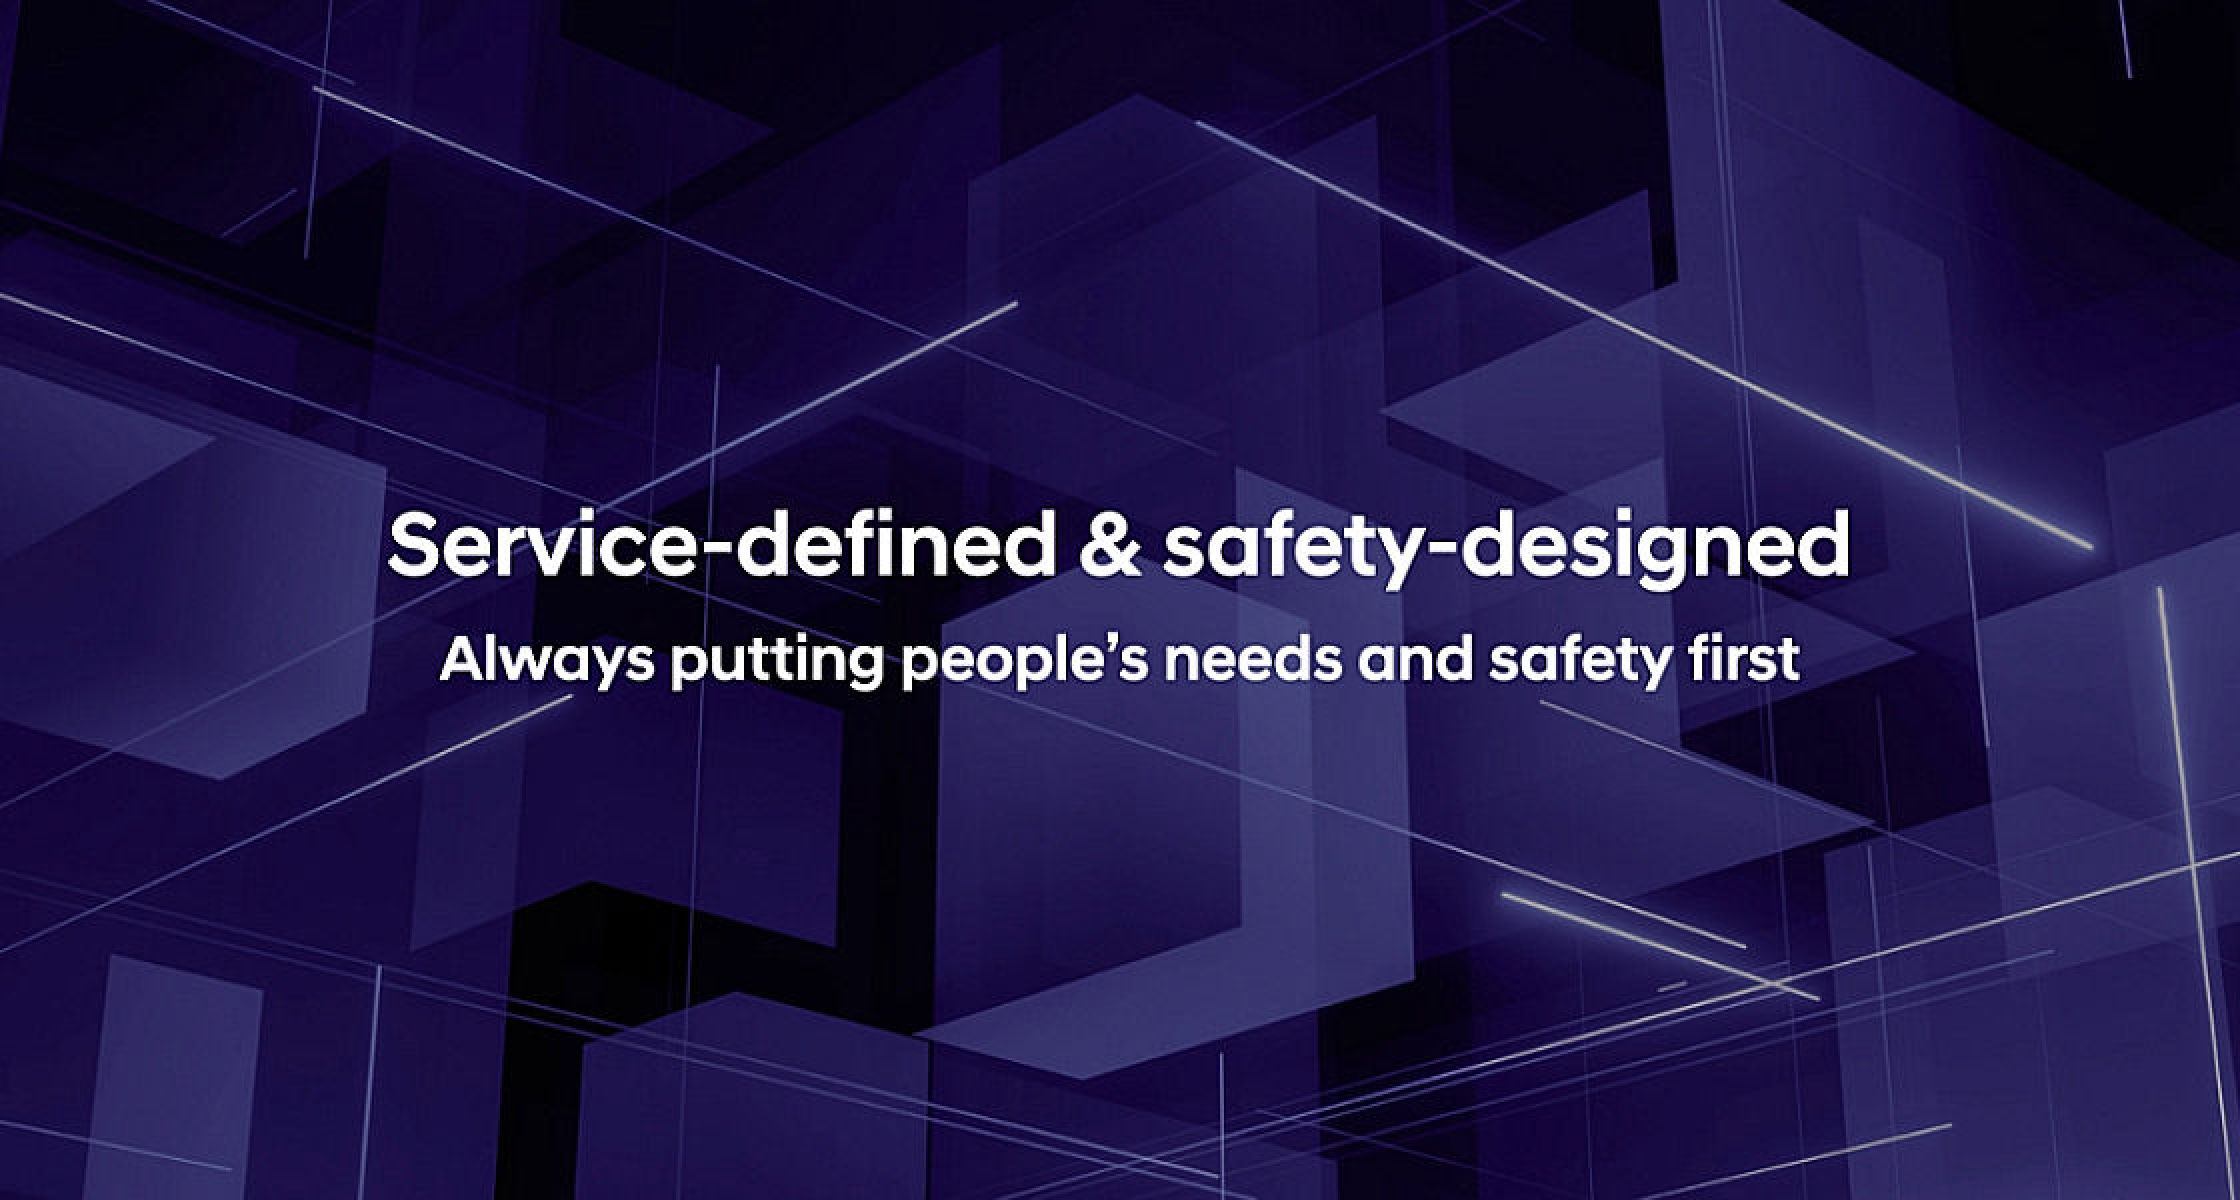 “Service-defined & safety-designed; Always putting people's needs and safety first”というHyundaiの哲学が、技術的な雰囲気を醸し出す紫色の背景の上に白で書かれています。  -  ヒョンデモビリティジャパン ブランドストーリー